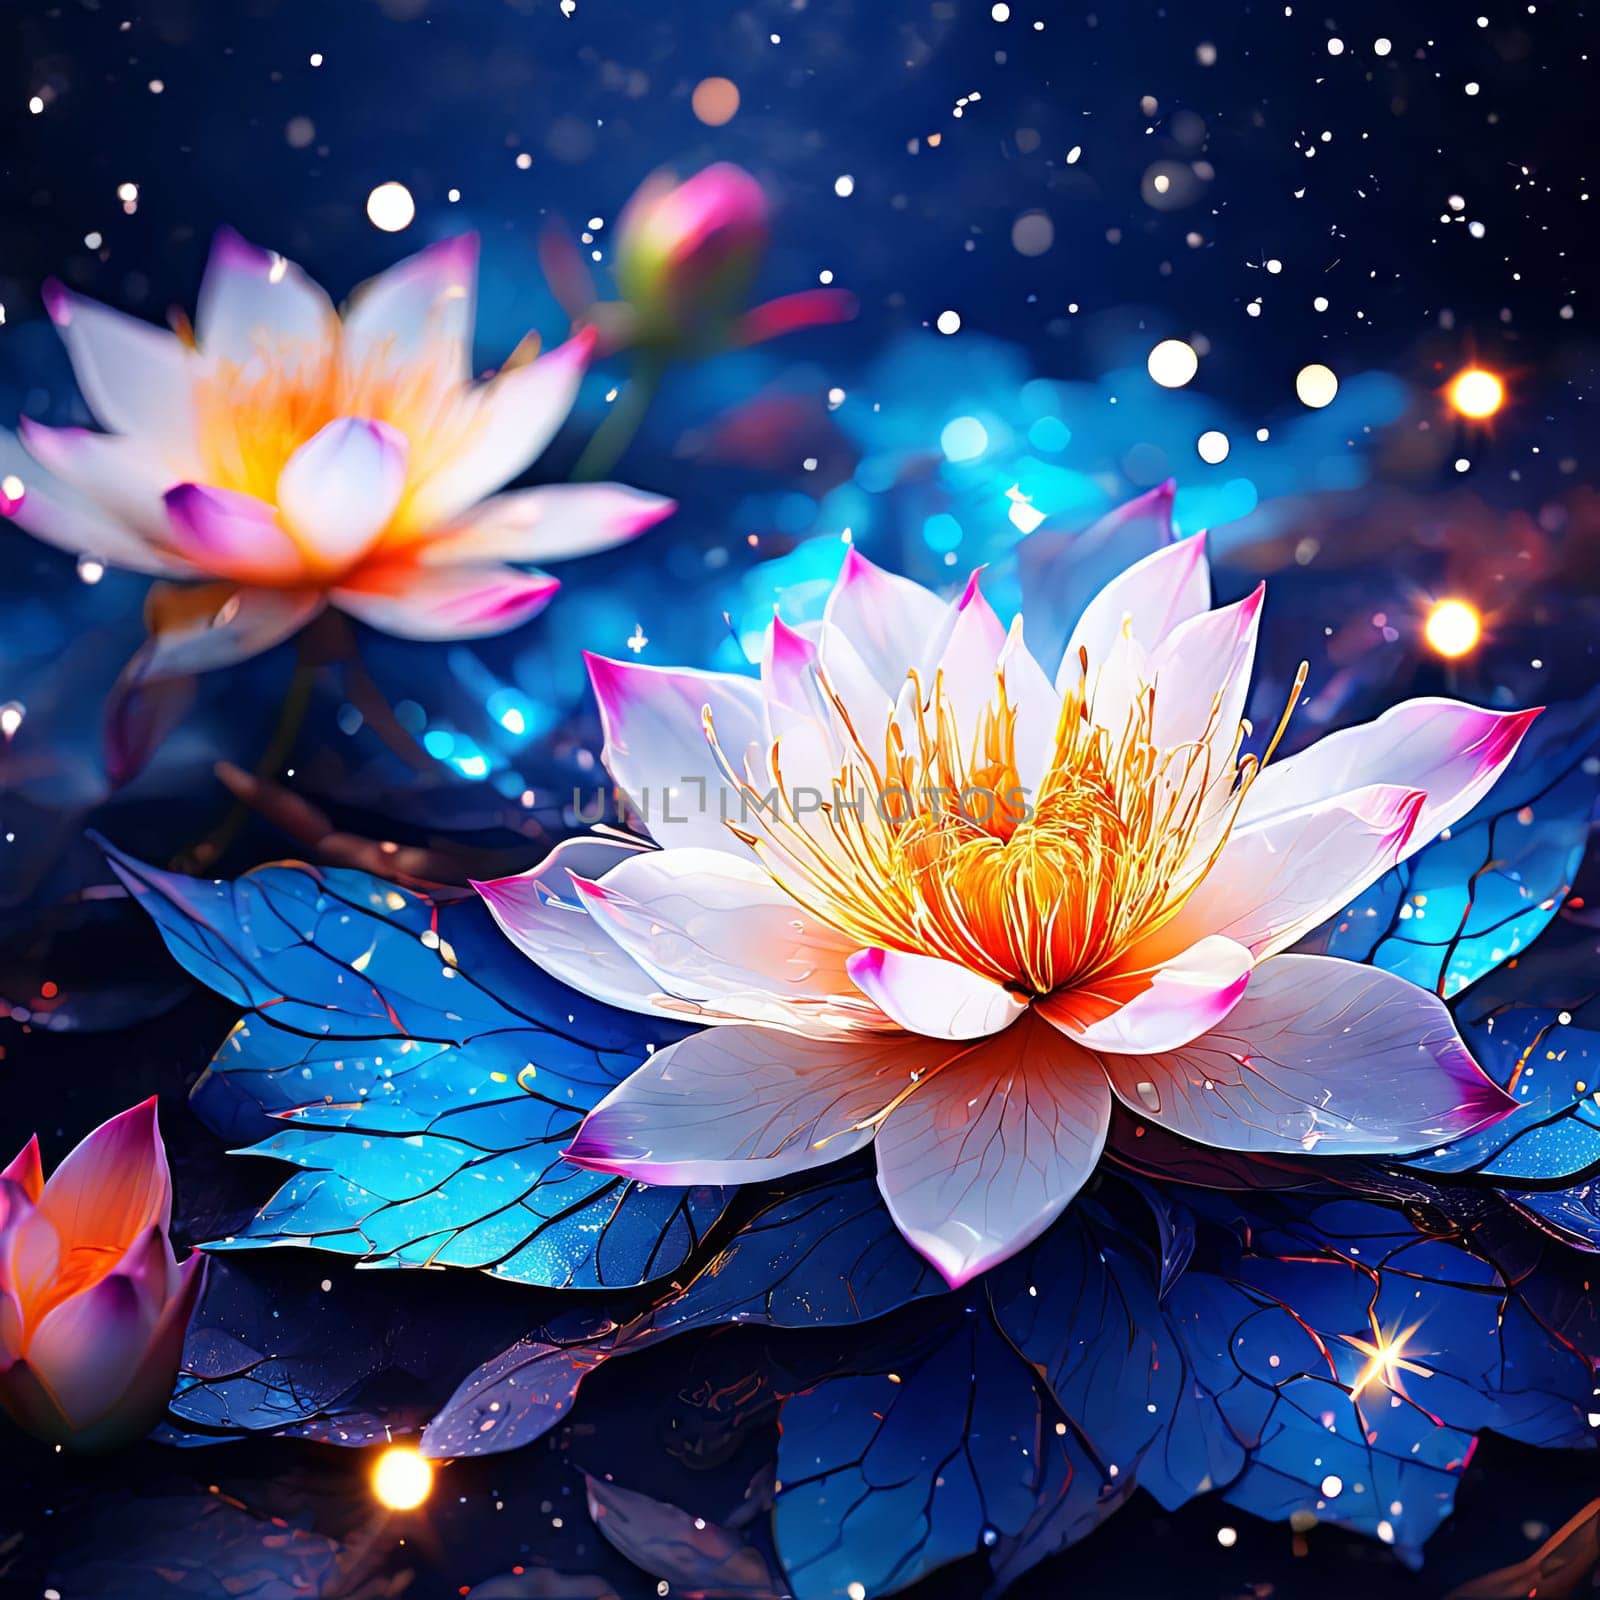 Serene lotus flowers amidst backdrop of twinkling stars. Enchanting scene that symbolizes purity, enlightenment, tranquility. For home interior room to add bright colors, coziness, gift wrapping. by Angelsmoon